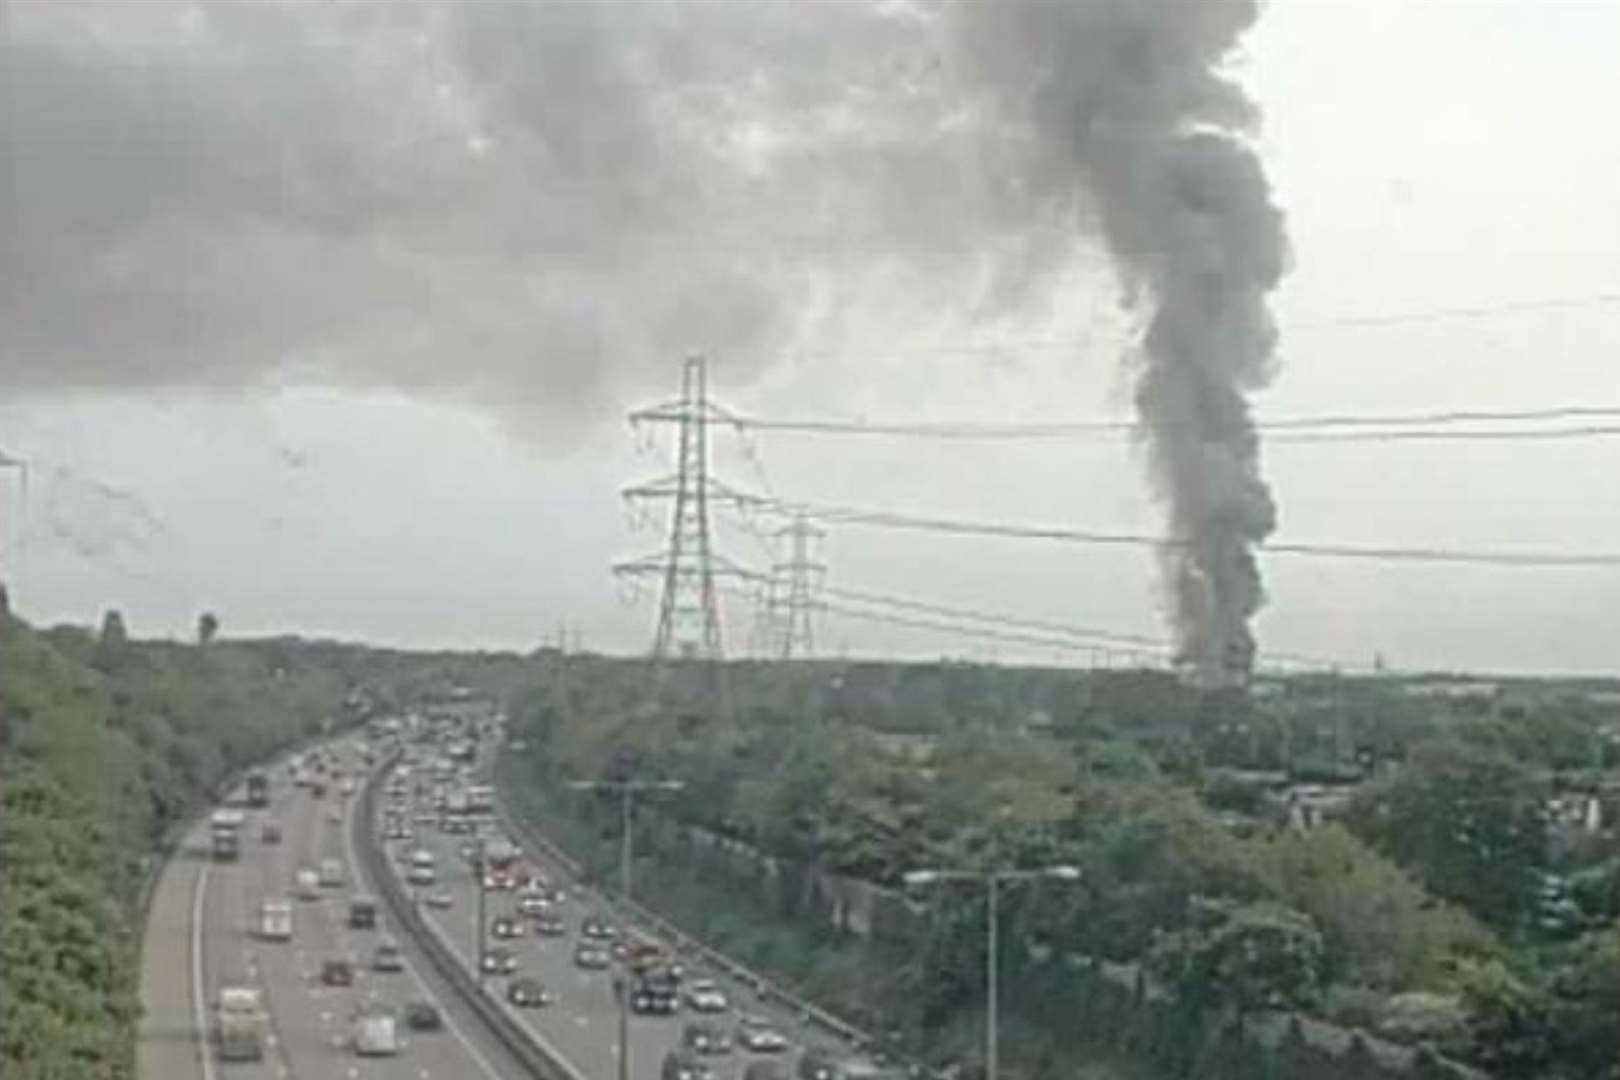 The fire near the M25 between junctions 10 and 11 can be seen for miles, say drivers. Picture: National Highways